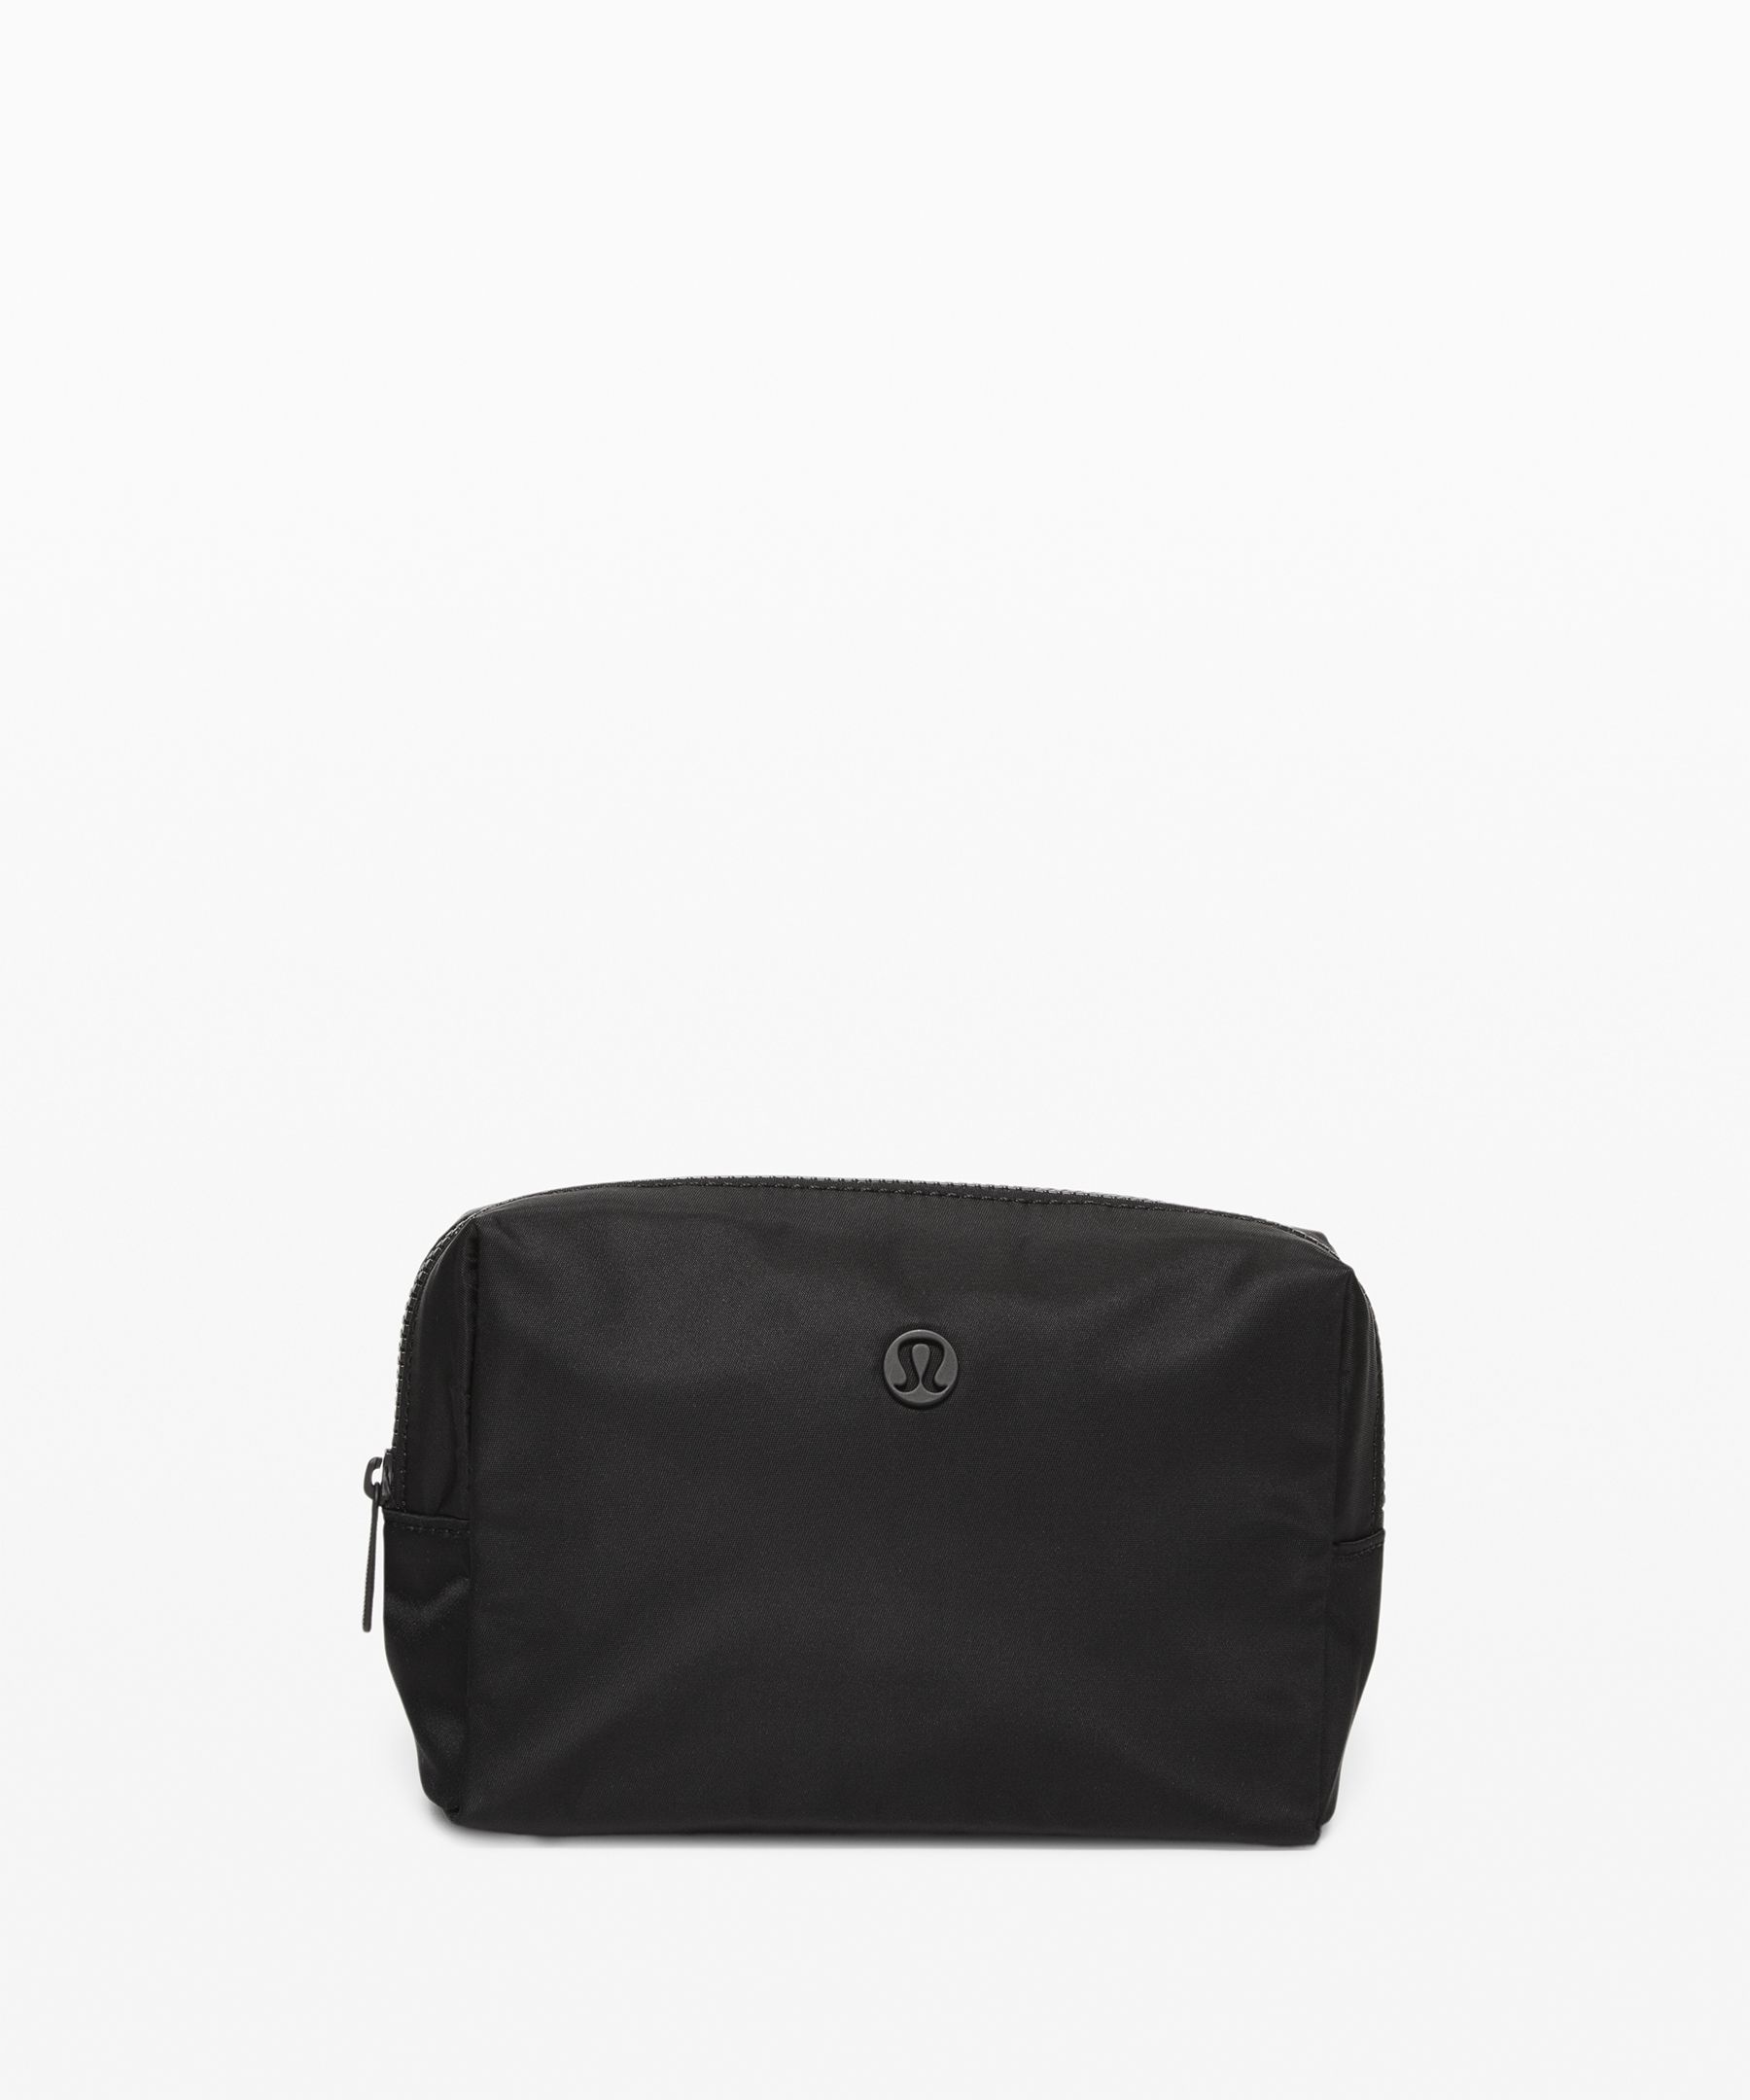 LULULEMON ALL YOUR SMALL THINGS POUCH *MINI 2L